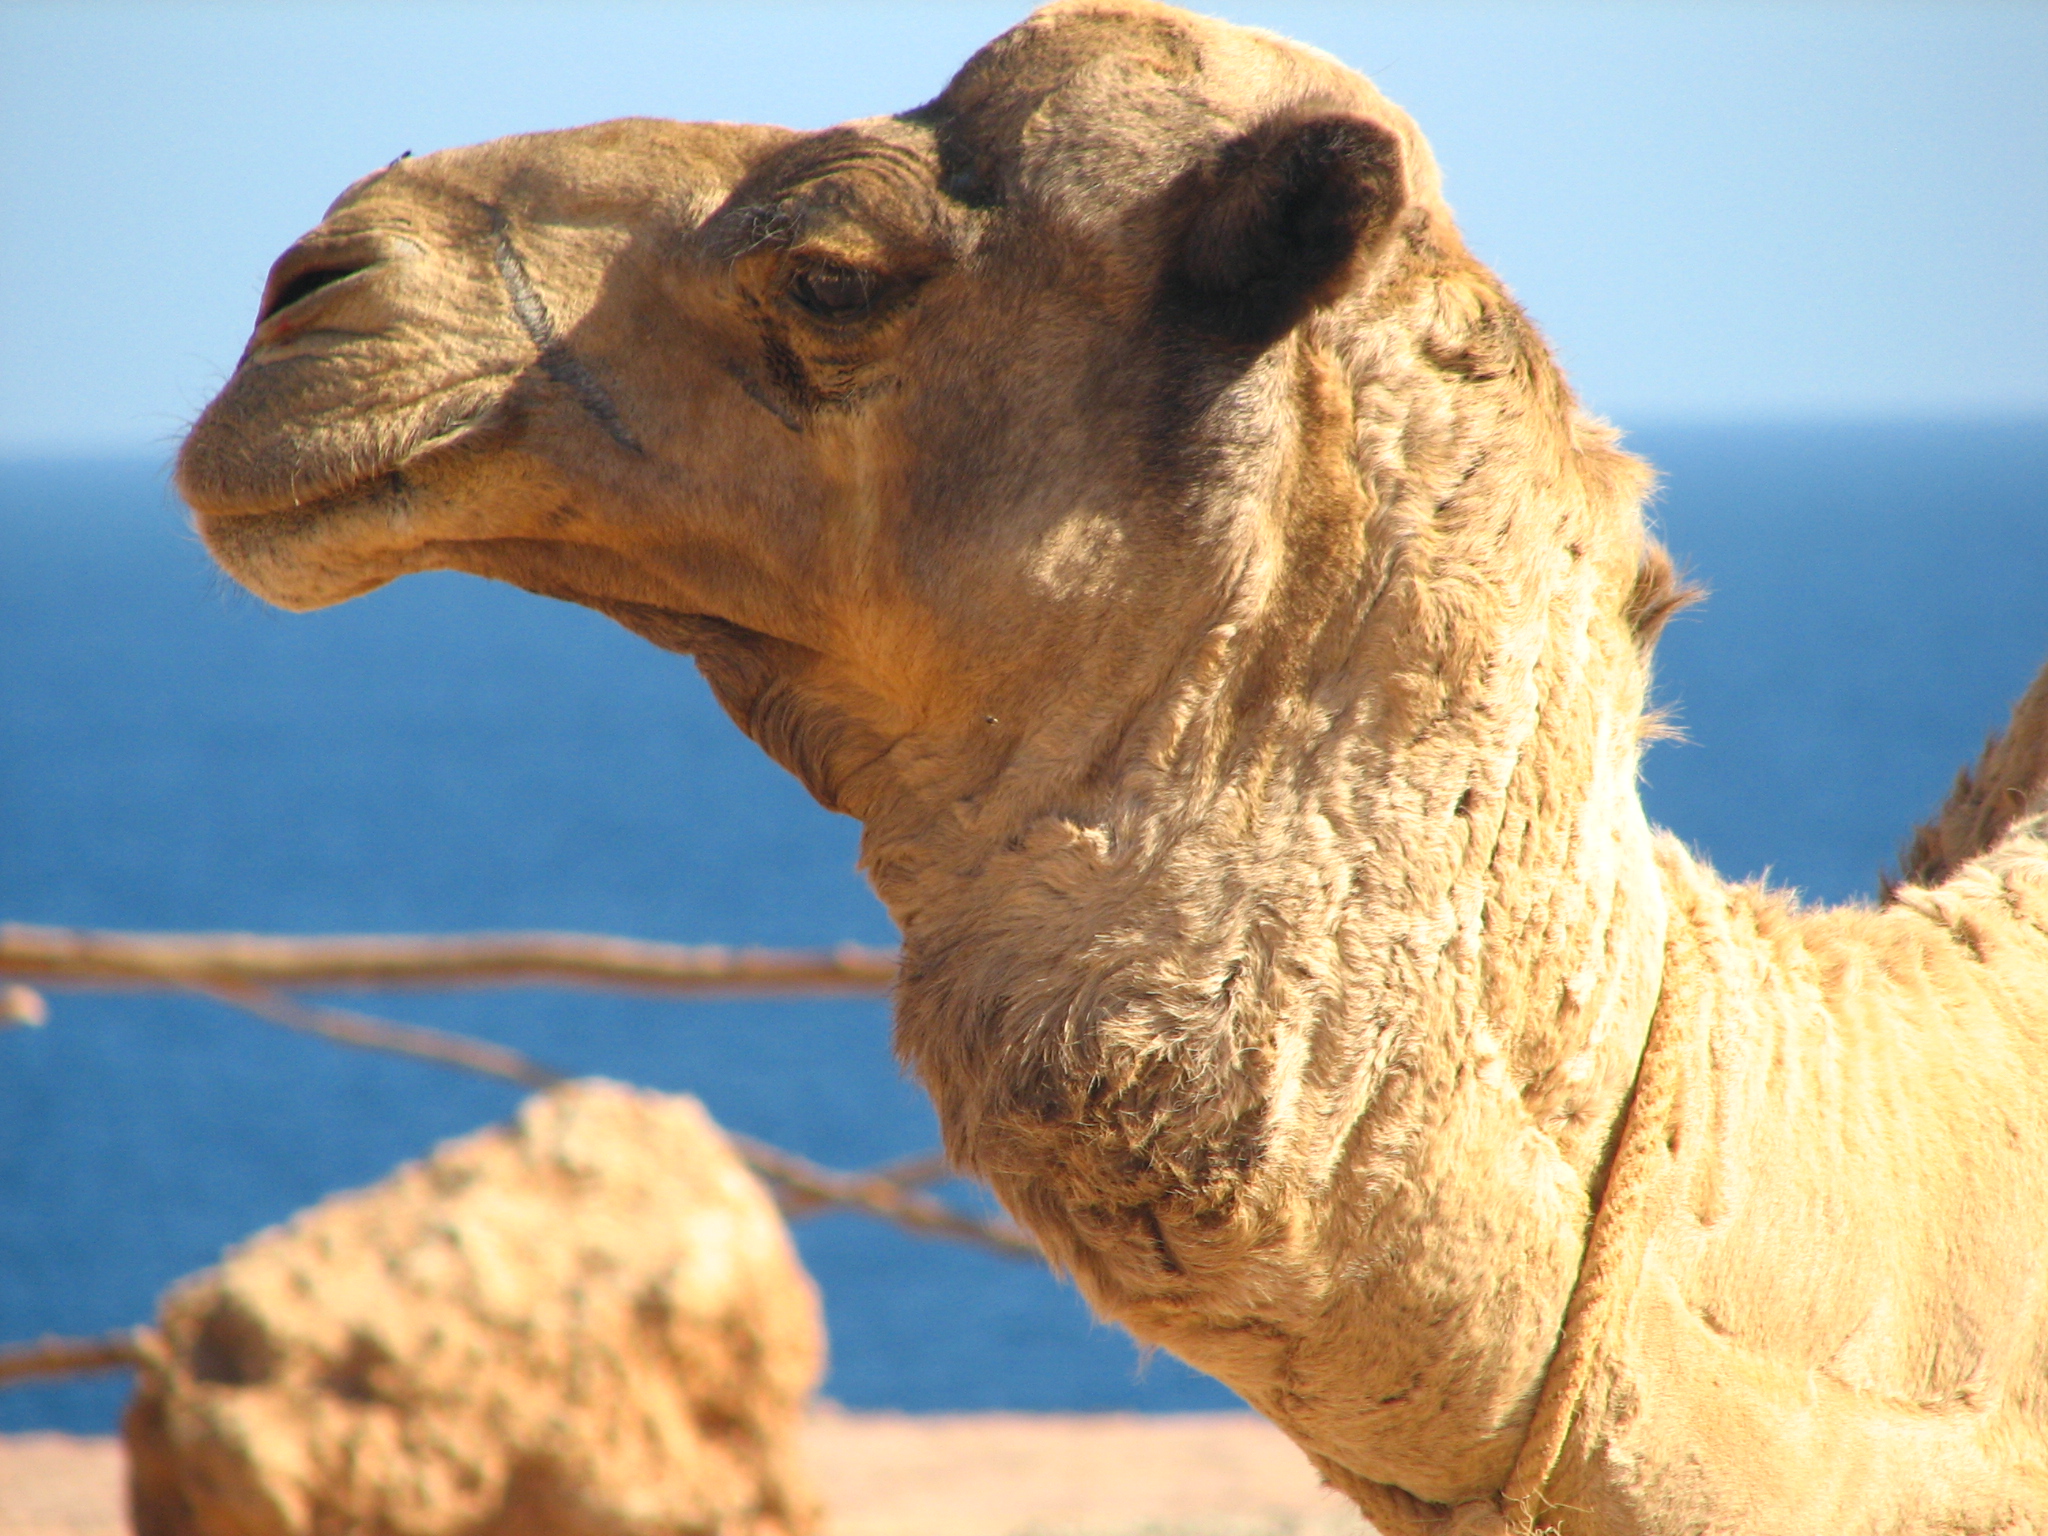 the head of a camel with blue water in background